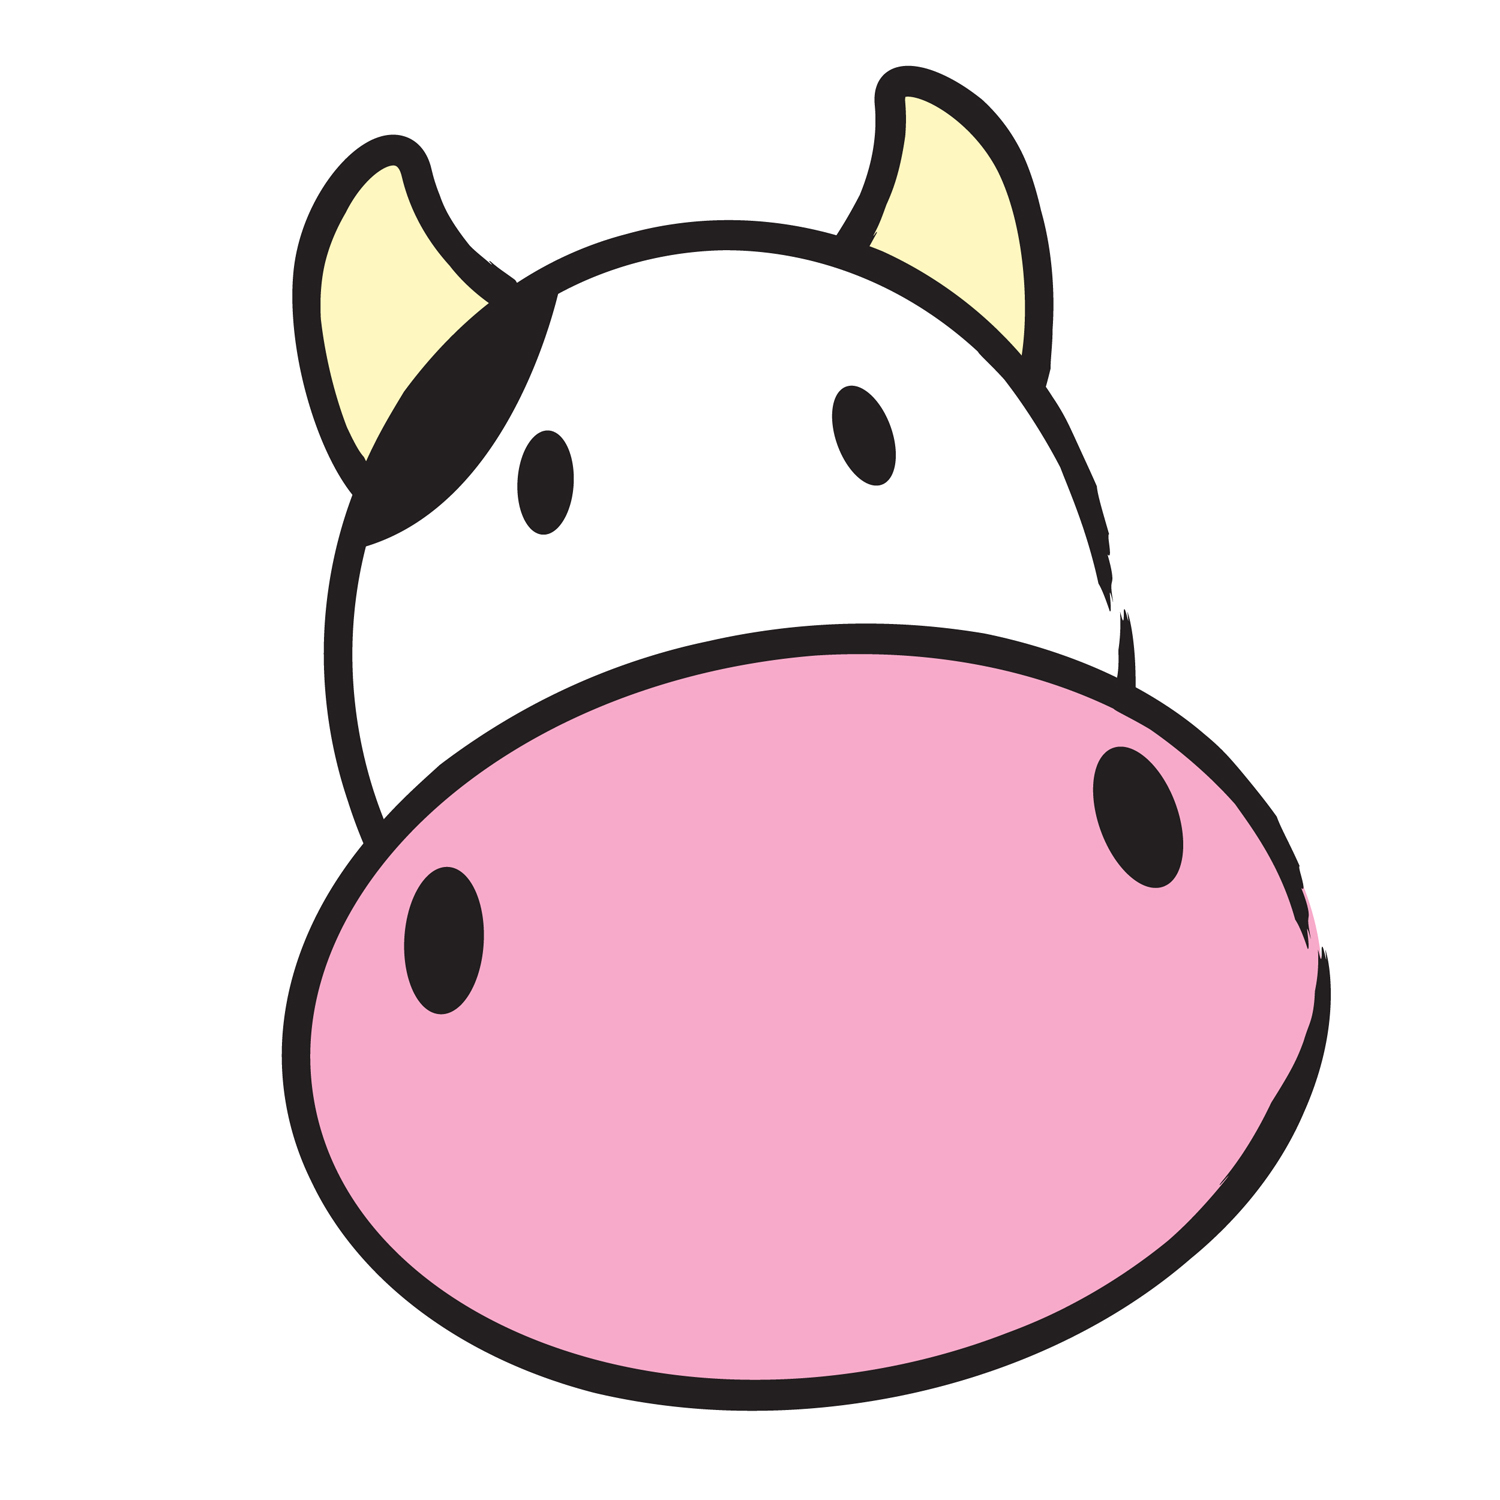 cow clipart simple - photo #1